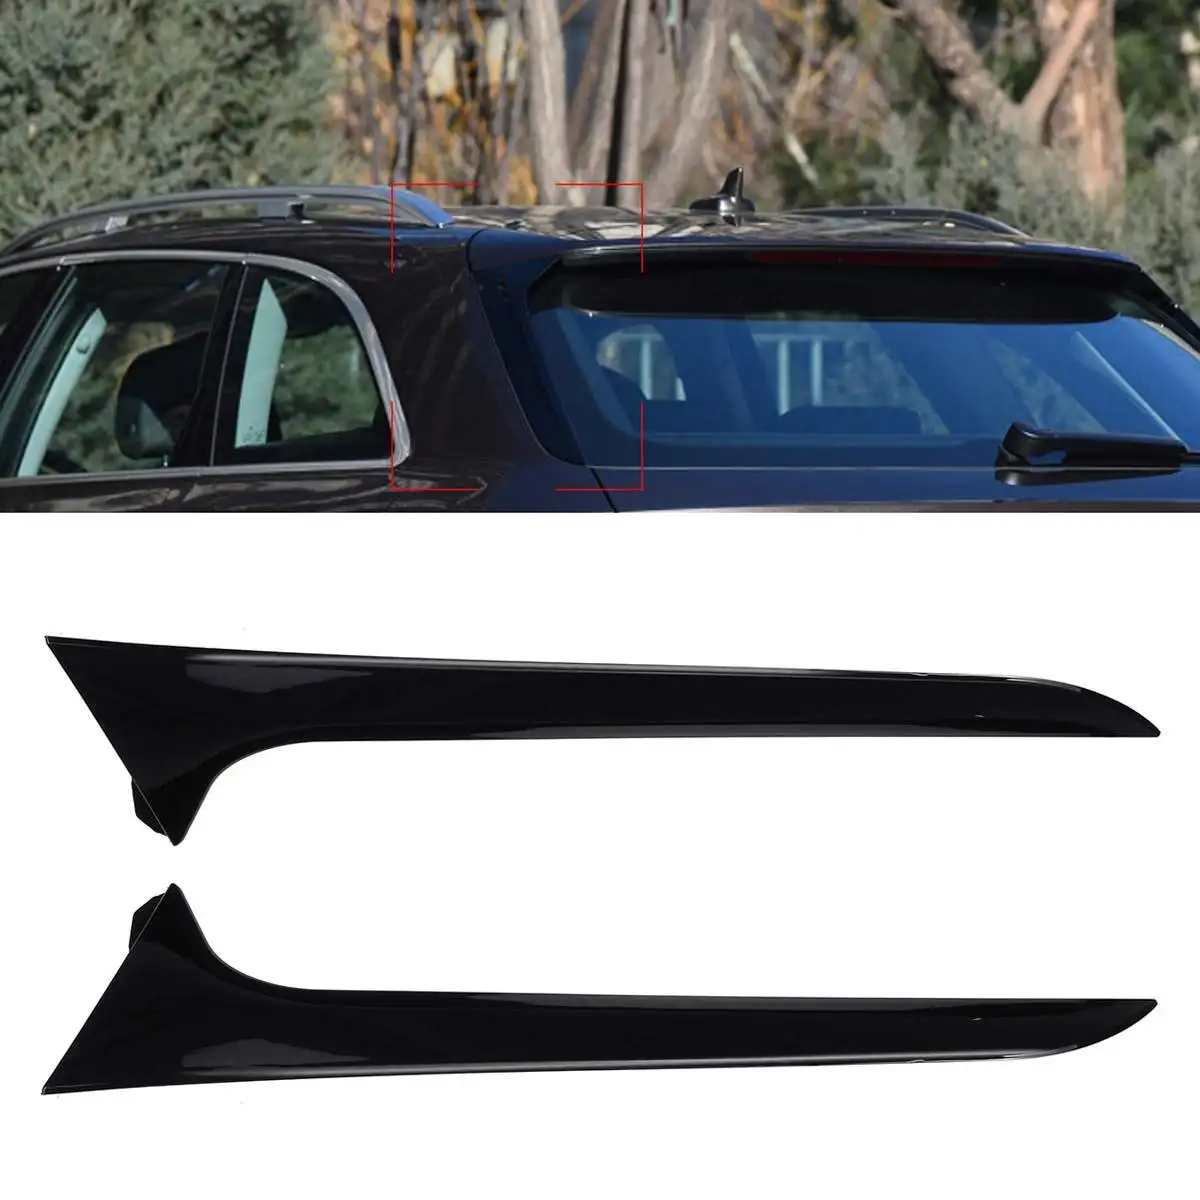 

Rear Behind Window Spoiler Side Strip Cover Trim Exterior Refit Kit Fit For Audi A6 C7 Allroad TDI Quattro/for Avant 2012-2018